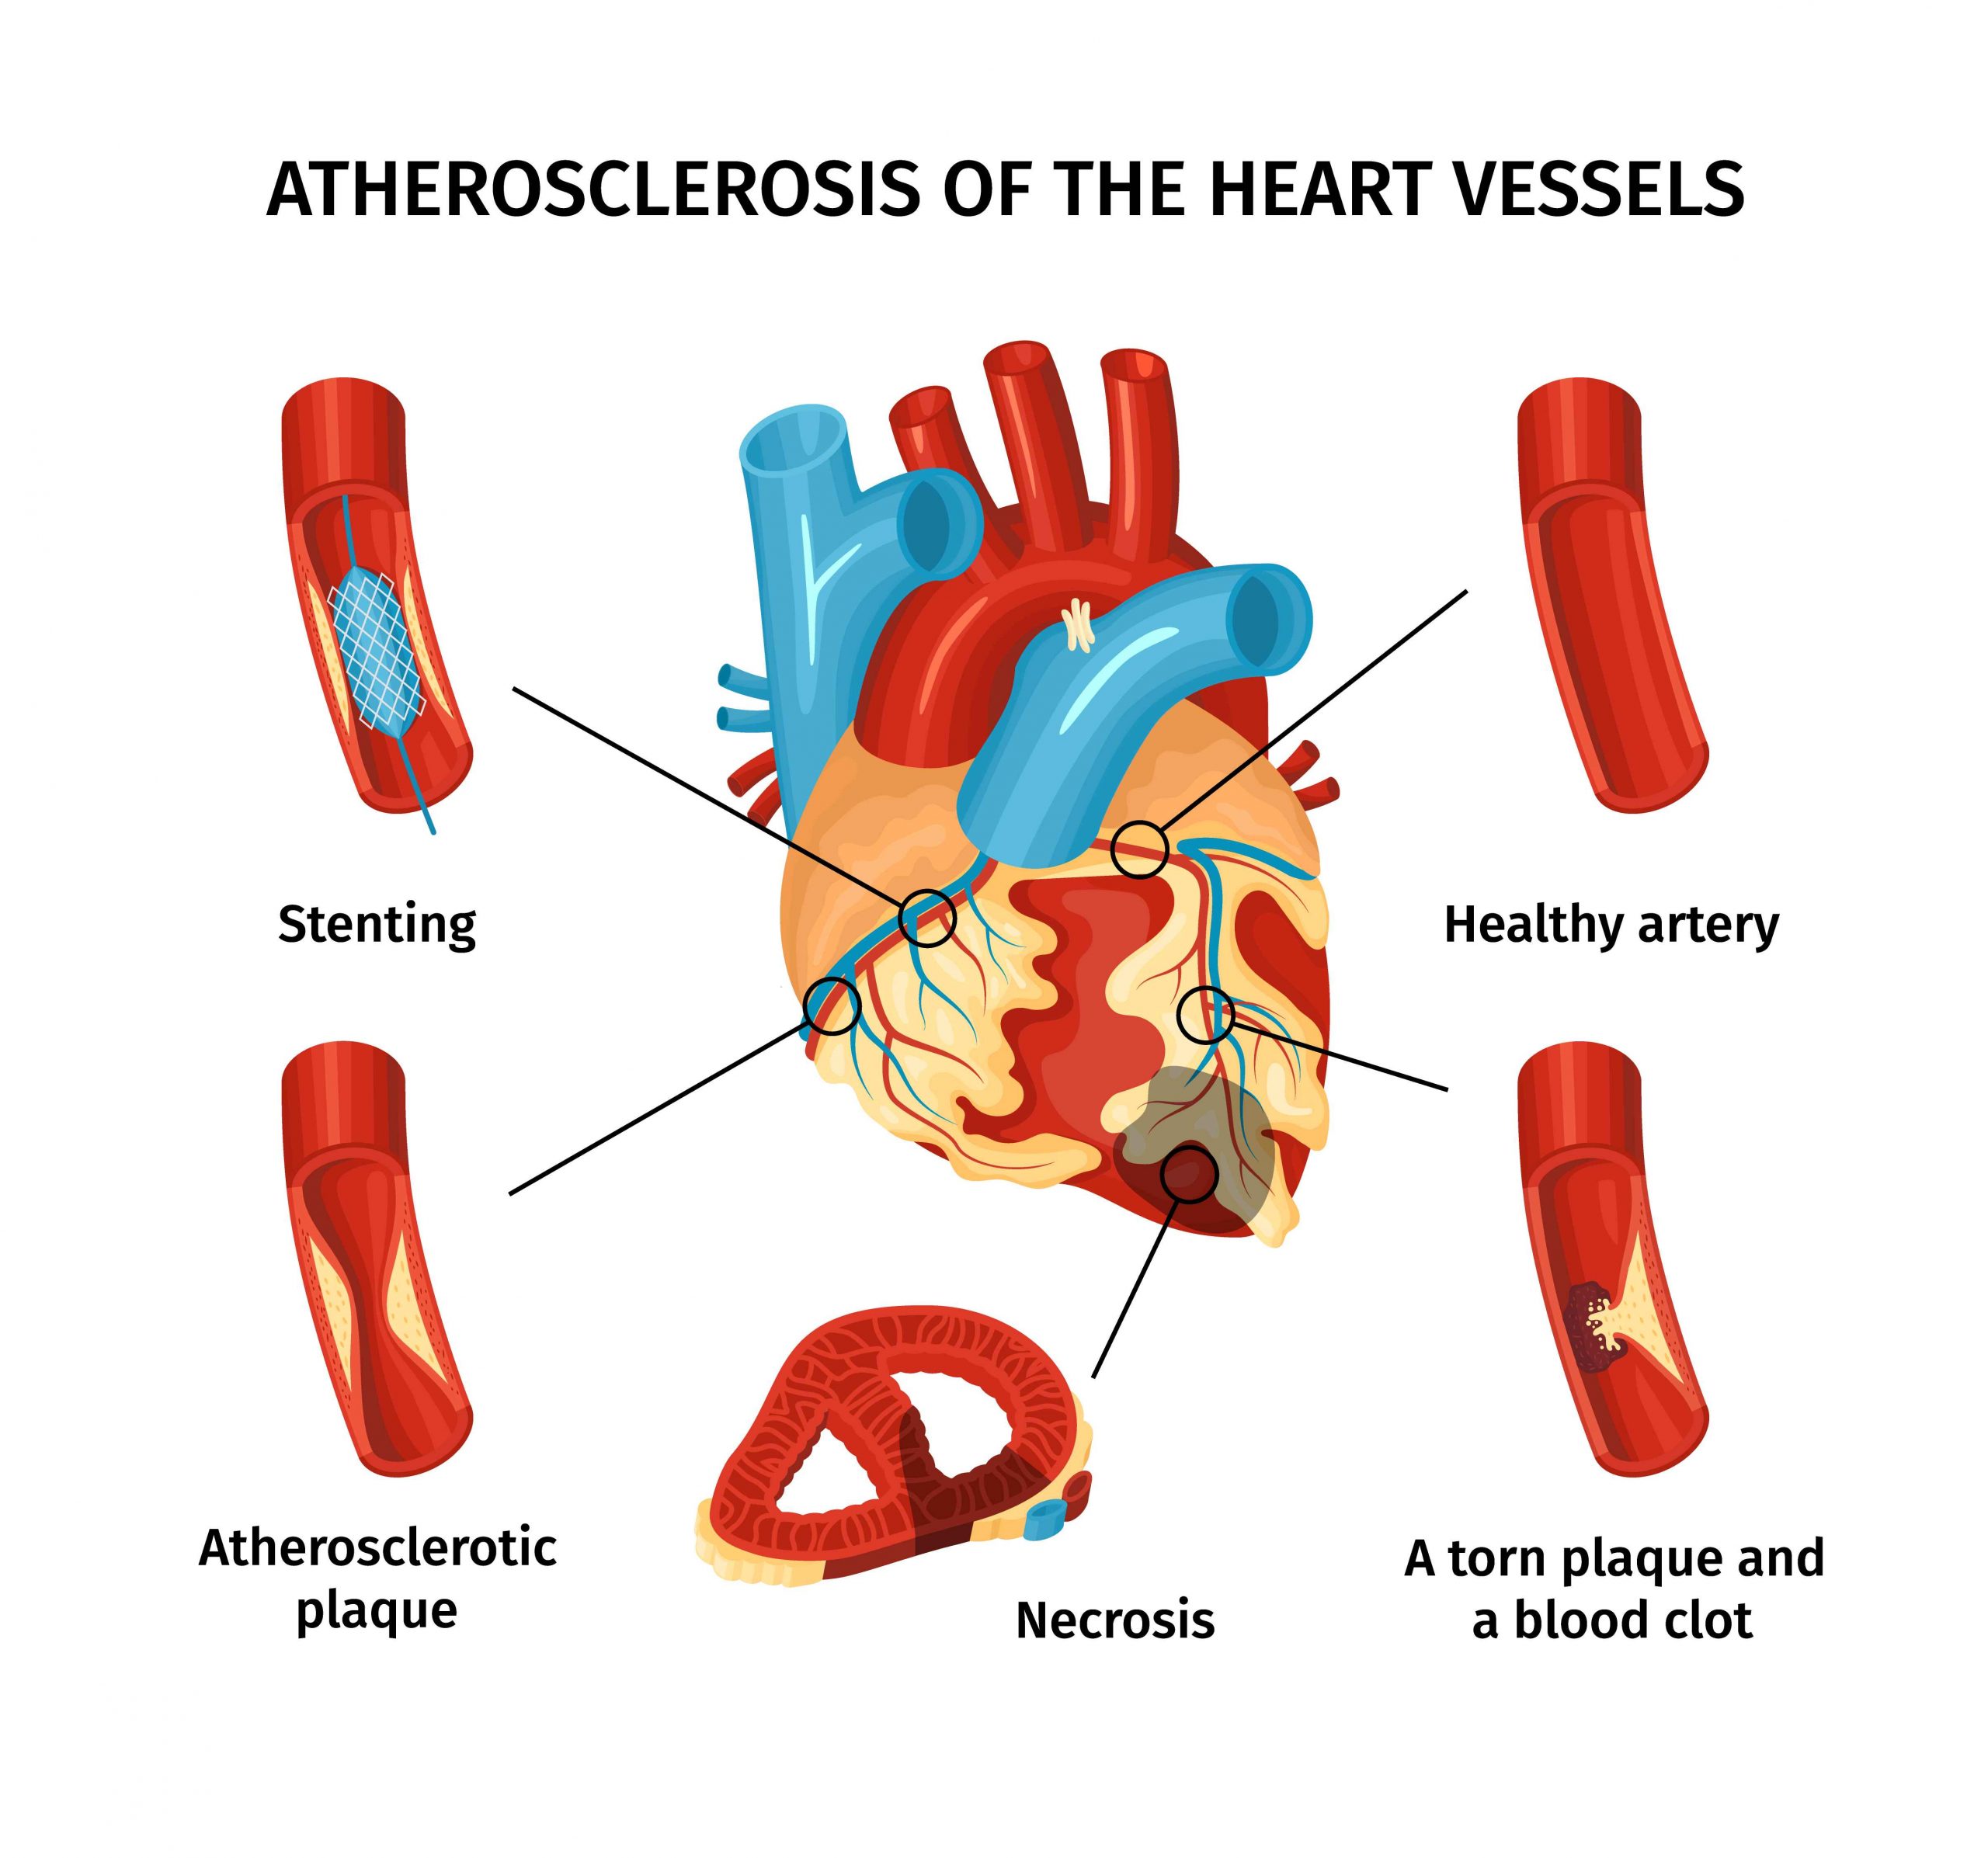 Are you worried about atherosclerosis? Here’s what you need to know.